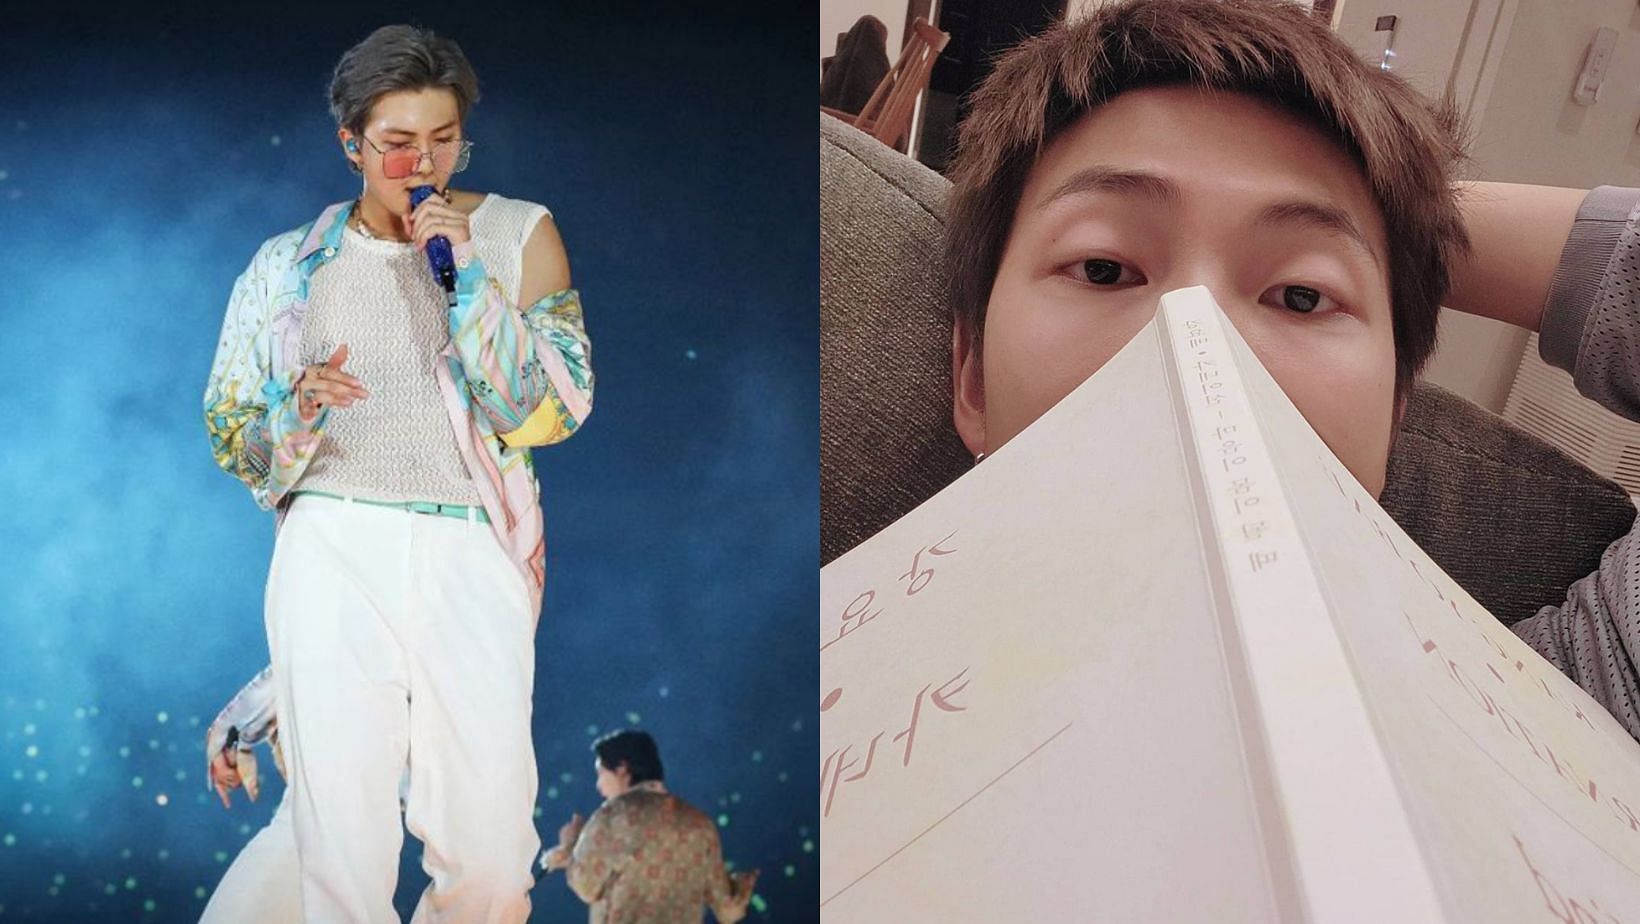 5 book recommendations by BTS&rsquo; Kim Namjoon from his favorites. (Images via Instagram/@rkive)